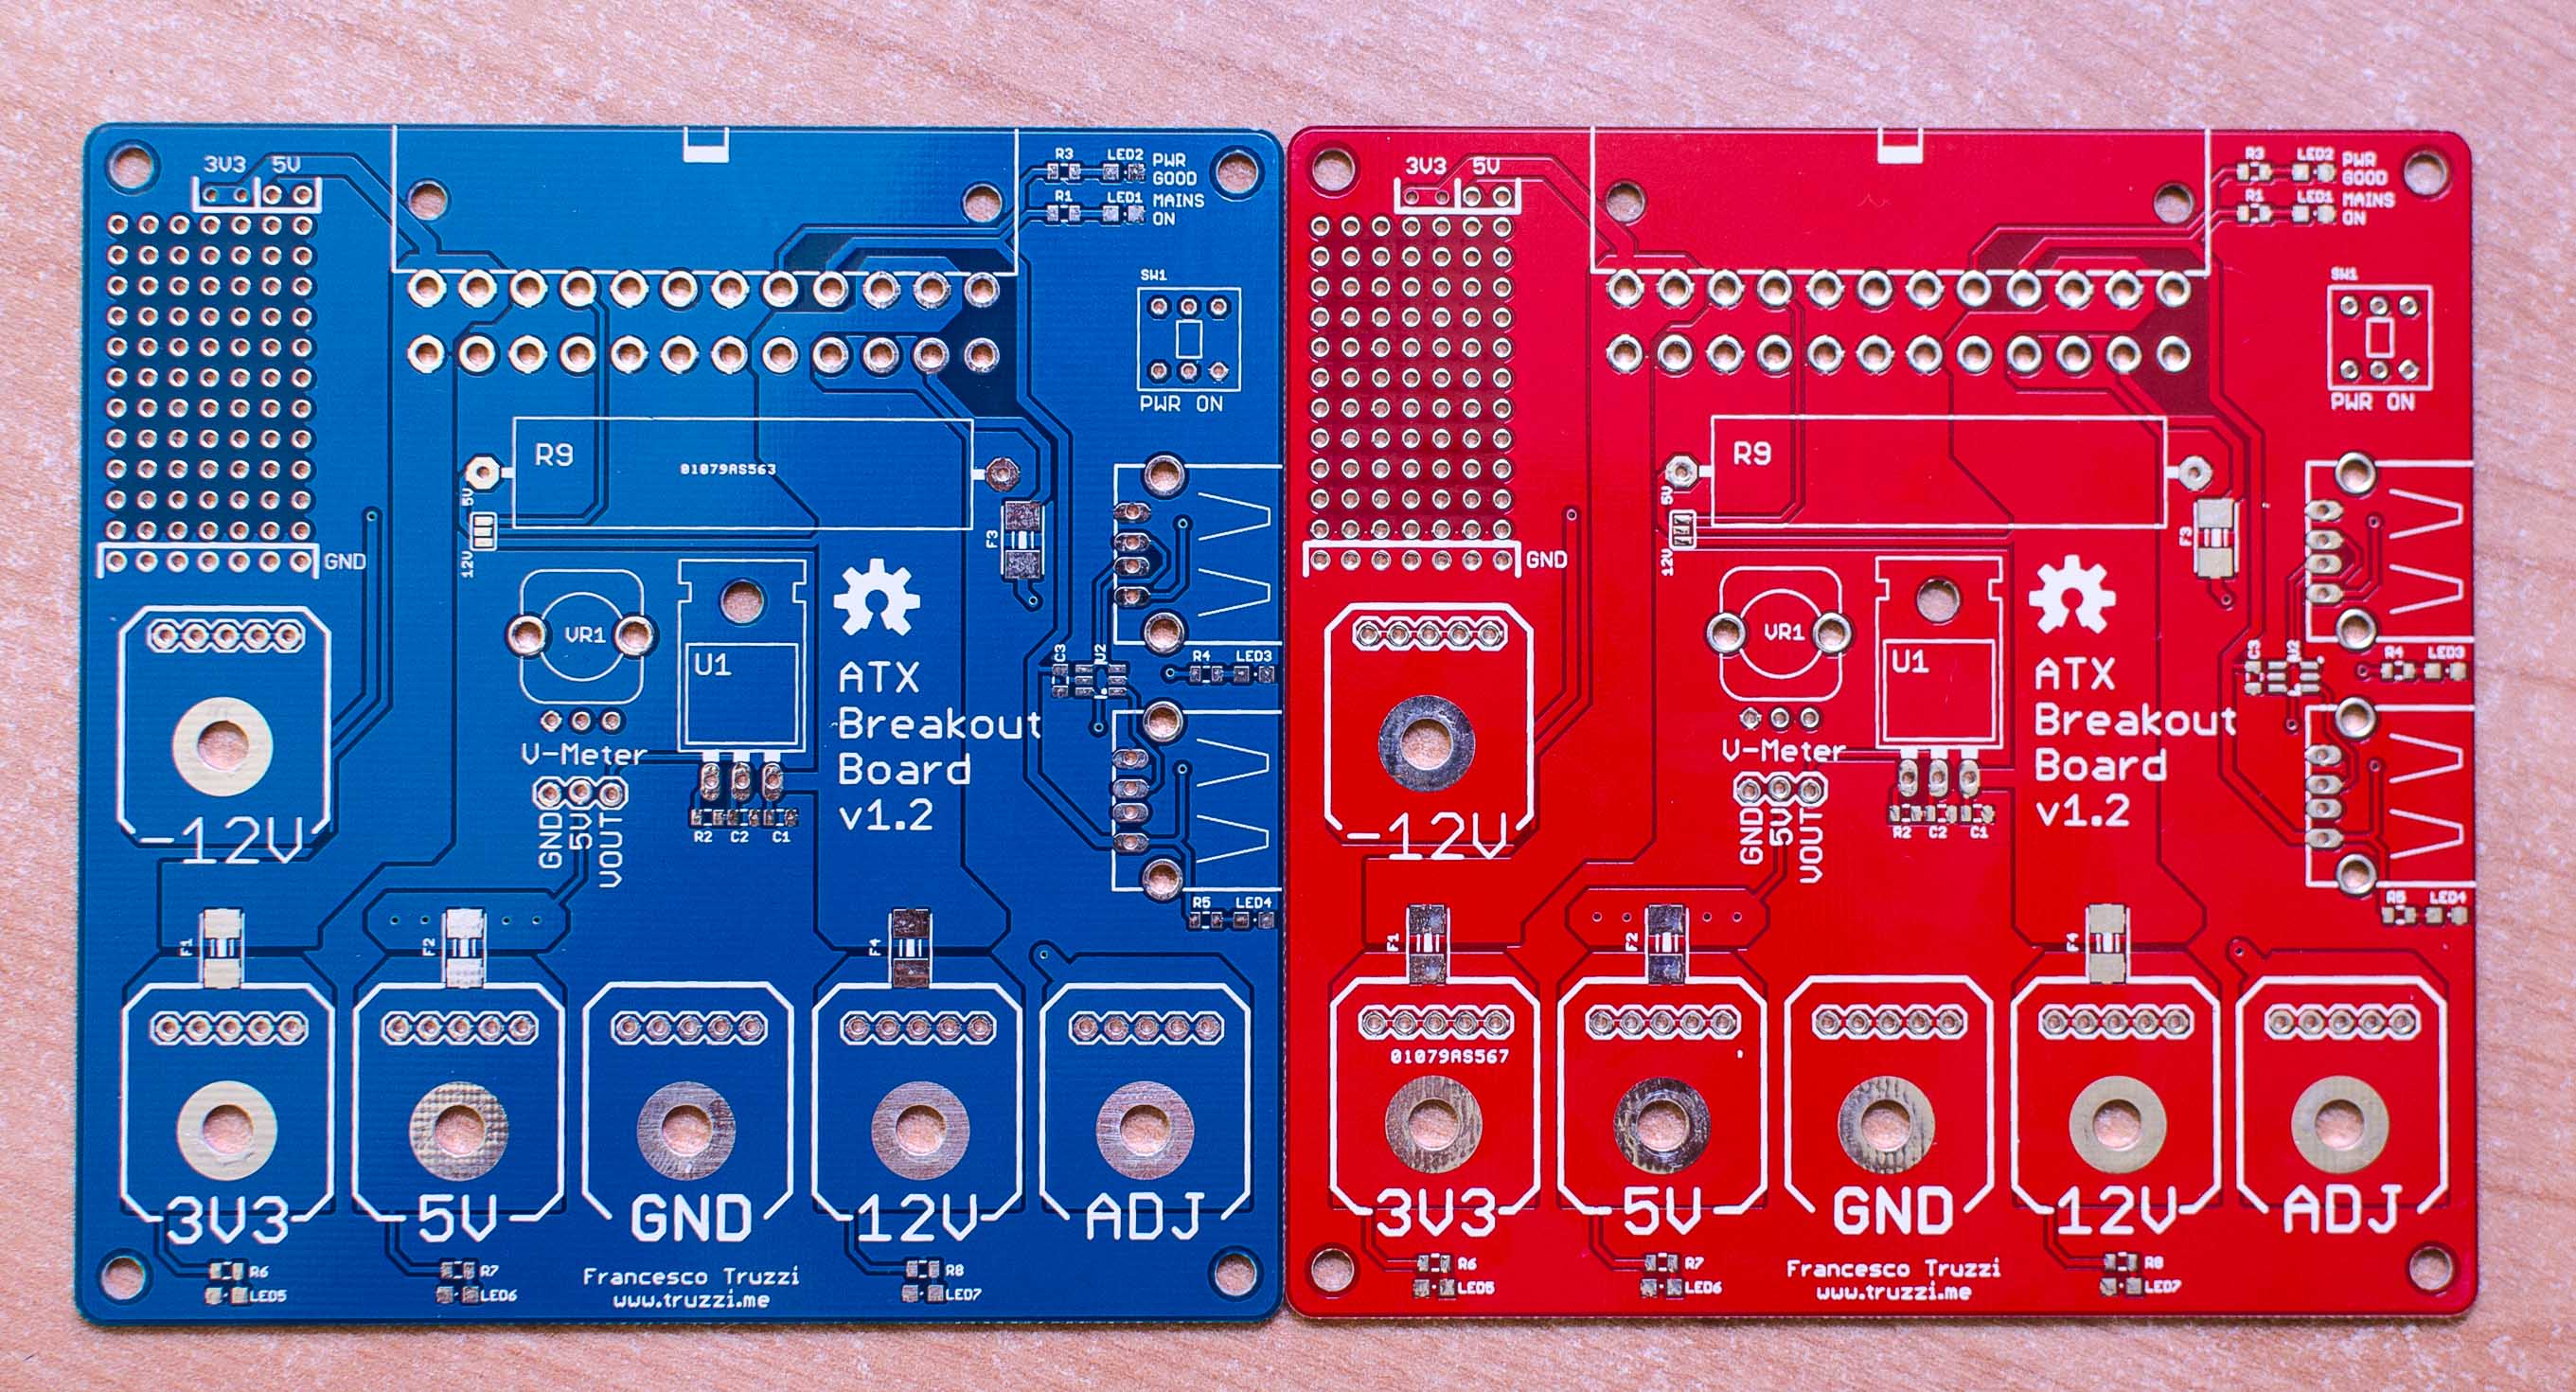 New ATX Breakout Board PCBs (with some improvements!)